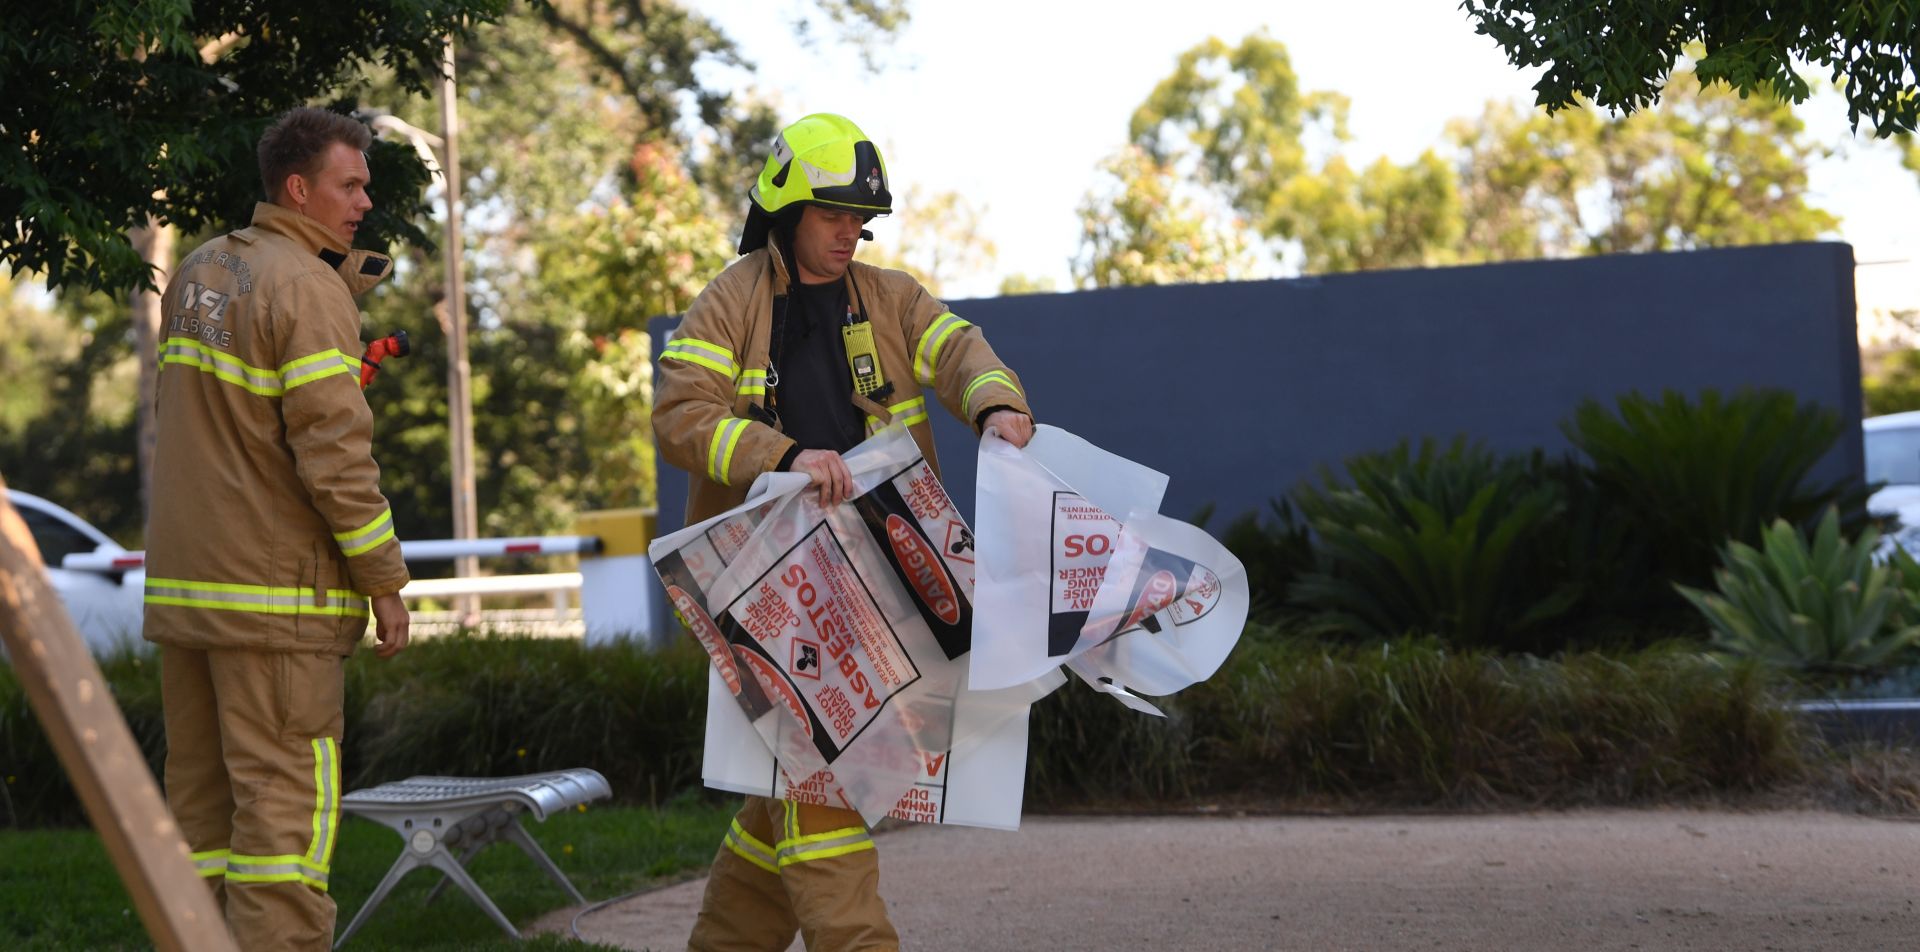 epa07270519 A fire fighter carrries a hazardous material bag into the Korean consulate in Melbourne, Australia, 09 January 2019. Staff have been evacuated as emergency crews respond to a number of incidents involving foreign consulates in Melbourne.  EPA/JAMES ROSS AUSTRALIA AND NEW ZEALAND OUT